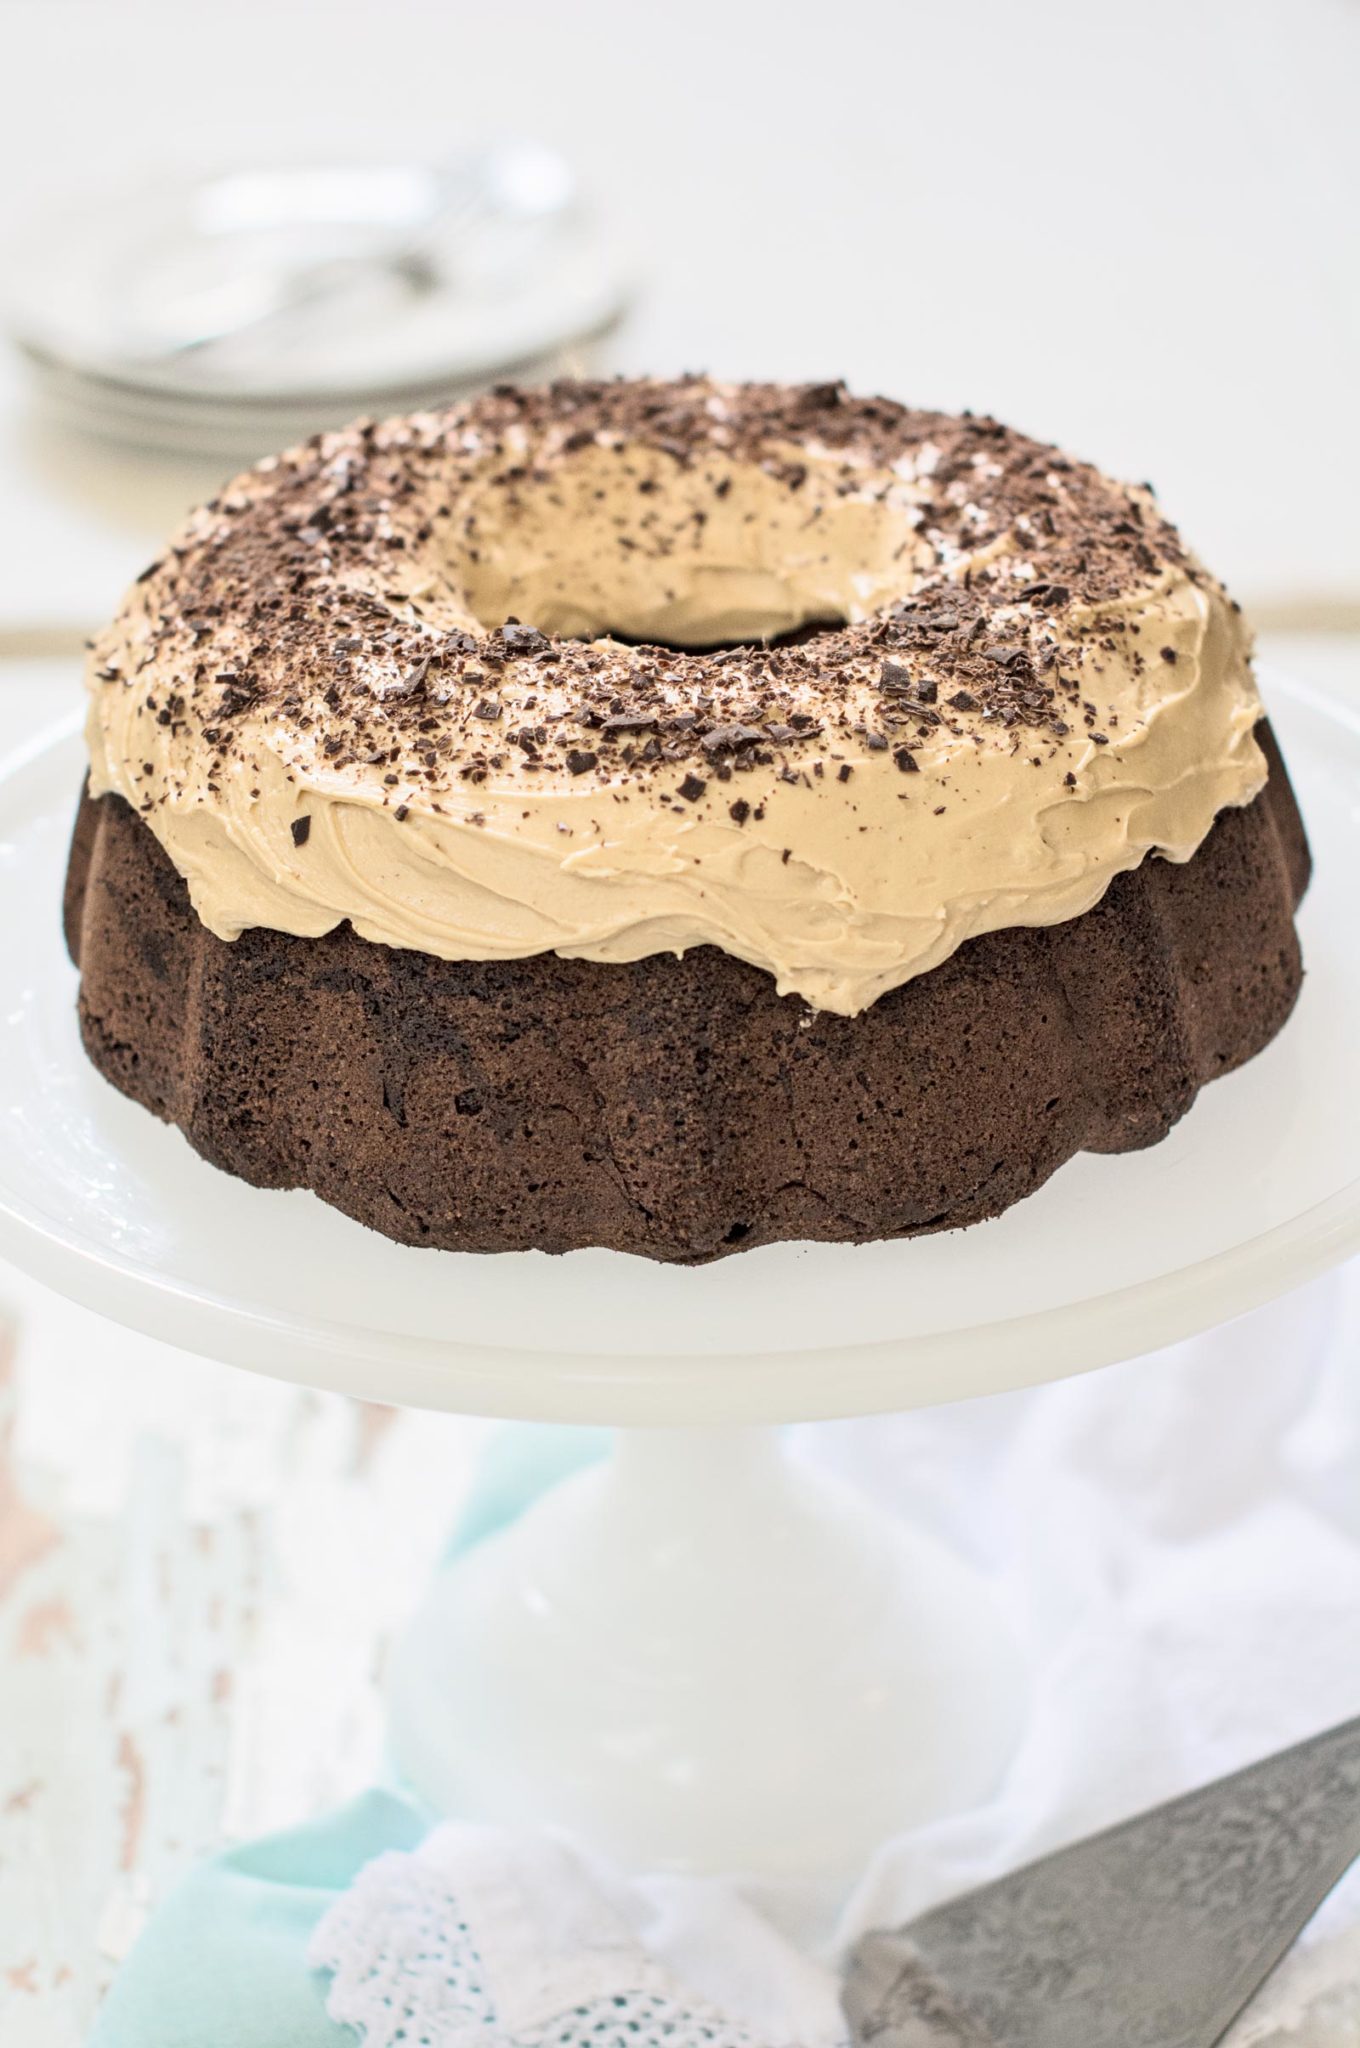 A lovely Cardamom Chocolate Cake recipes topped off with an oh so creamy frosting! Recipe @LittleFiggyFood